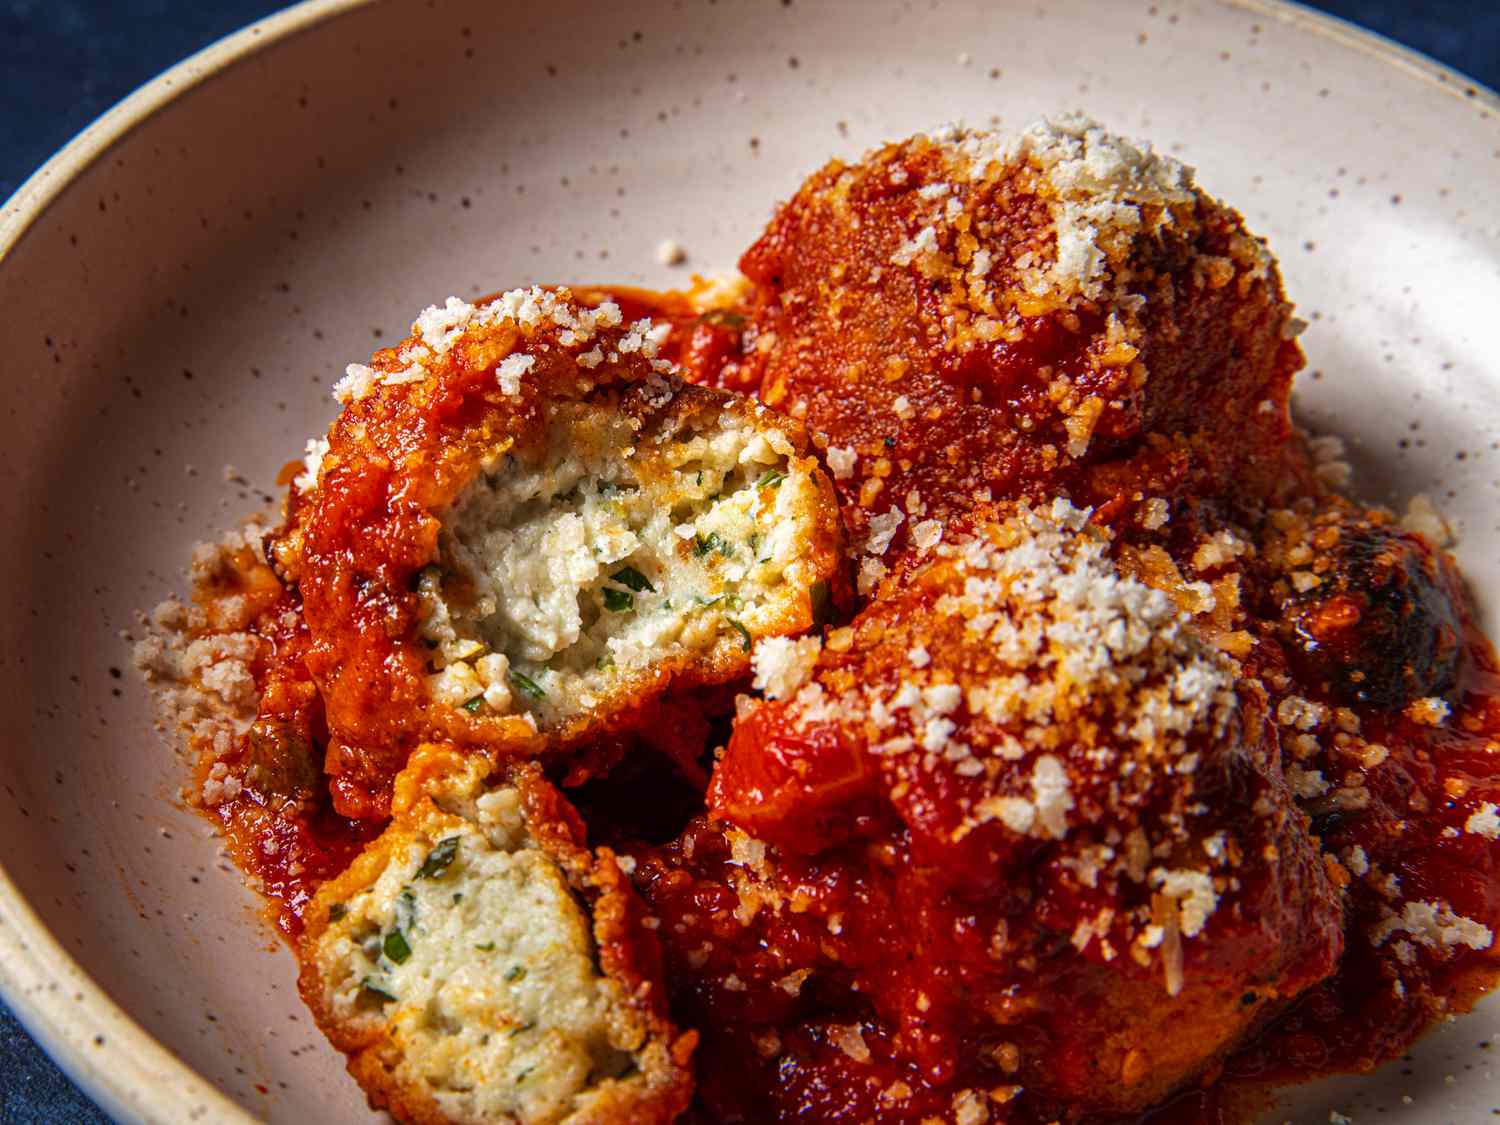 Side angle view of a cut open ricotta ball in red sauce